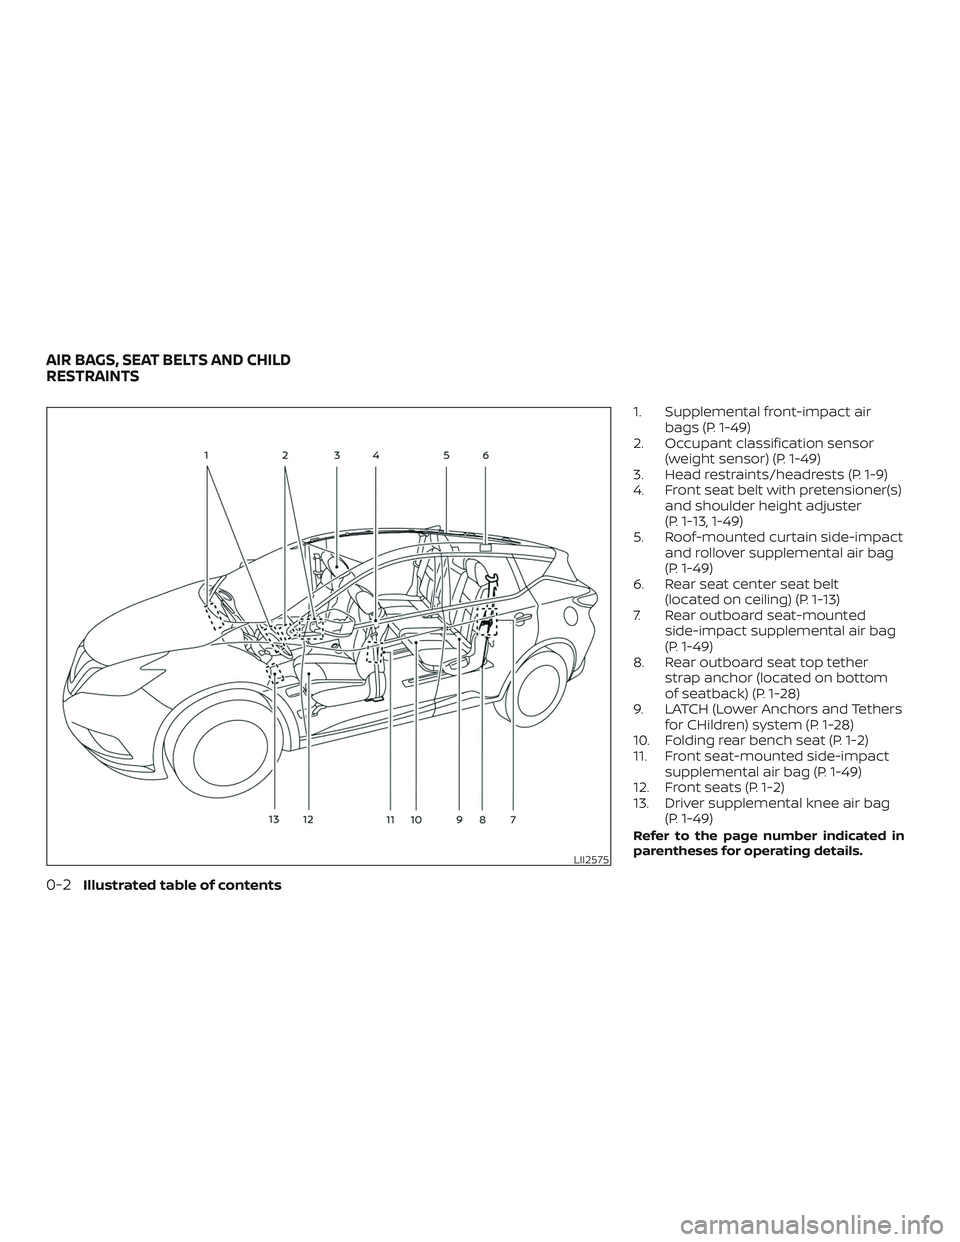 NISSAN MURANO 2019  Owner´s Manual 1. Supplemental front-impact airbags (P. 1-49)
2. Occupant classification sensor (weight sensor) (P. 1-49)
3. Head restraints/headrests (P. 1-9)
4. Front seat belt with pretensioner(s) and shoulder he